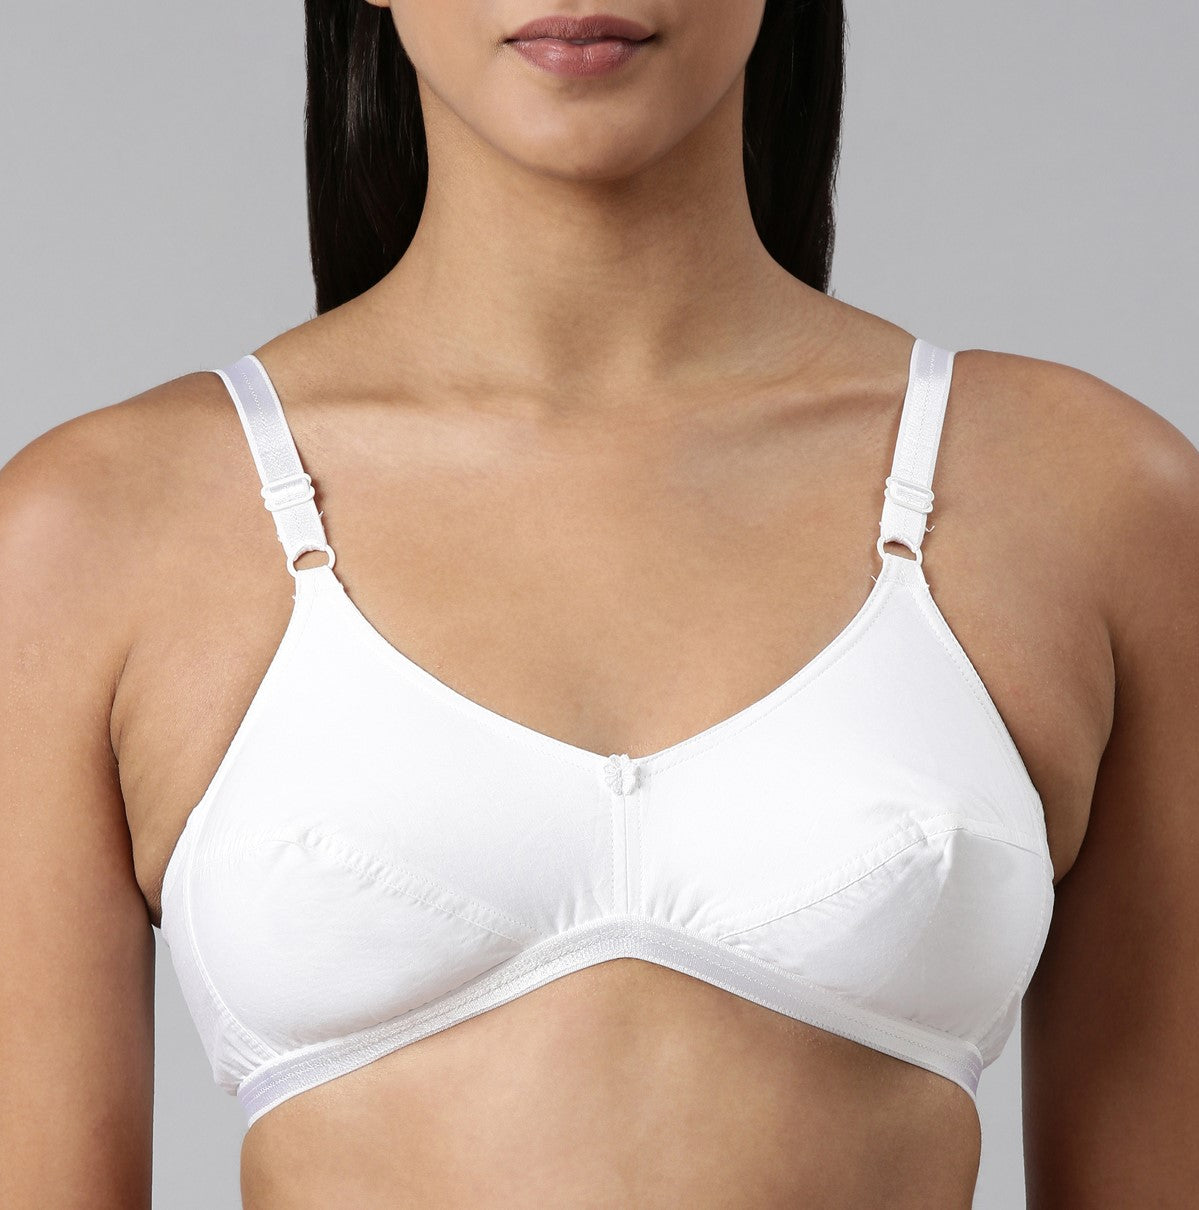 BLOSSOM Plain Moulded Cup Brilliant Bra, For Inner Wear at Rs 310